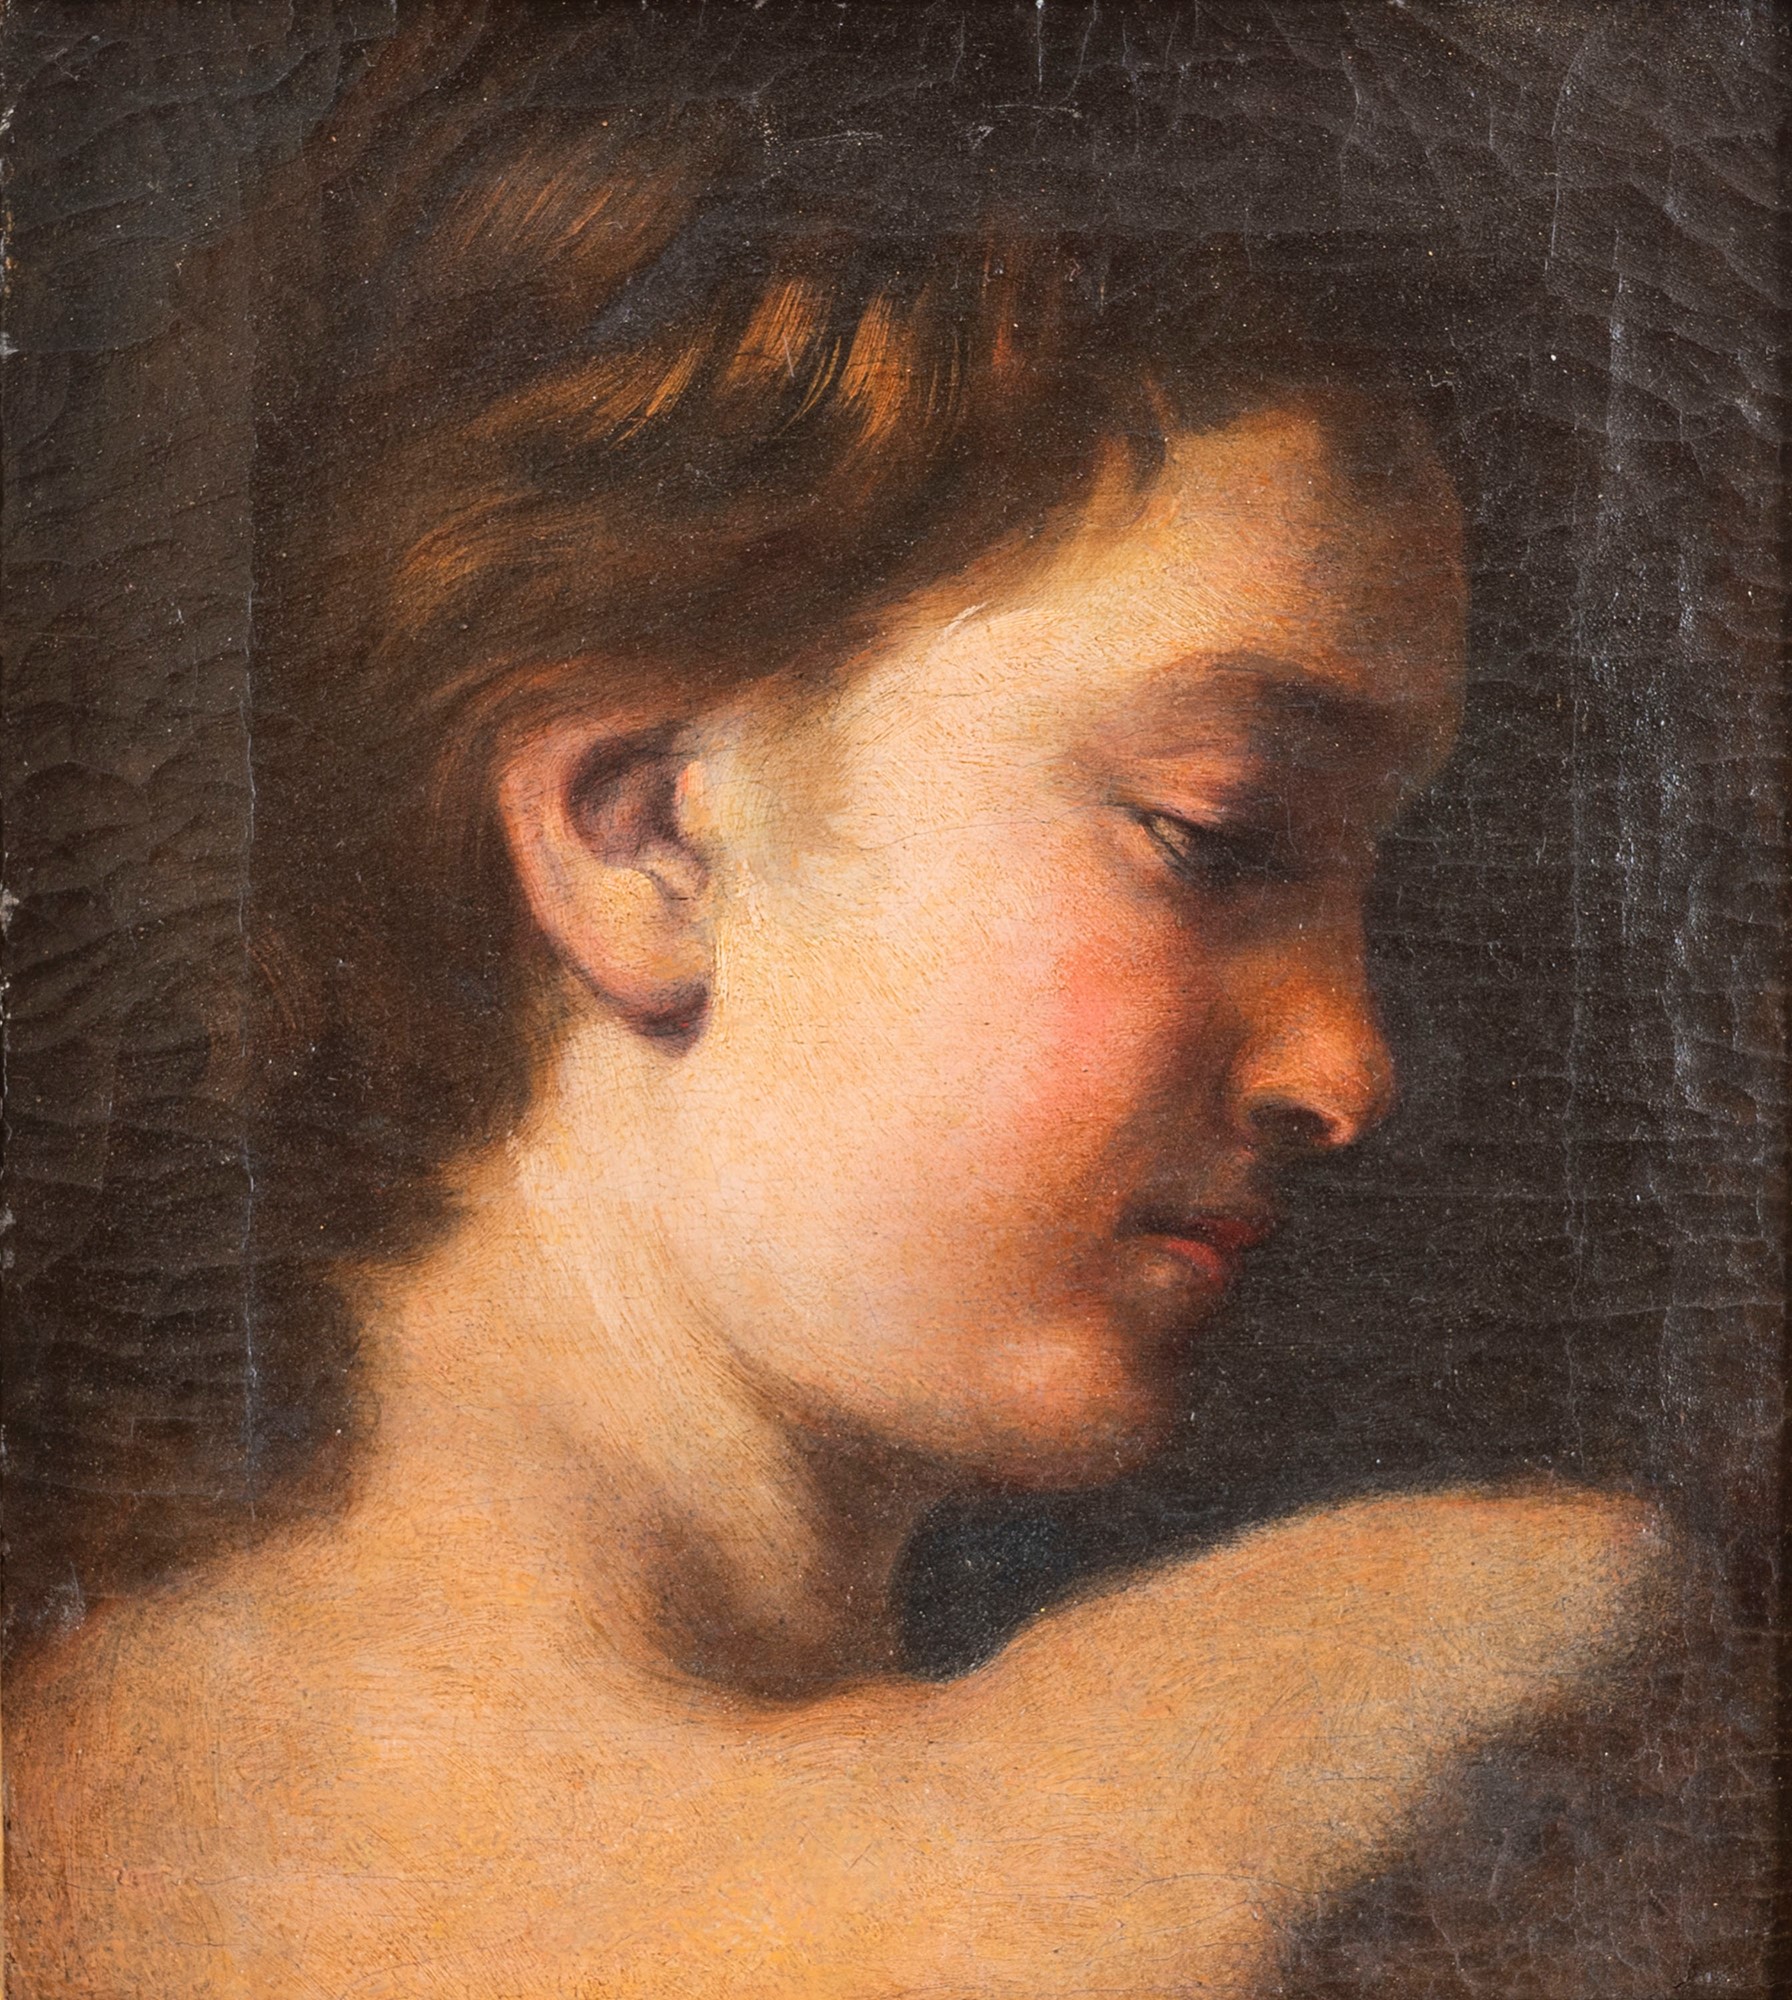 Tuscan School, XVII century - Study of a young man